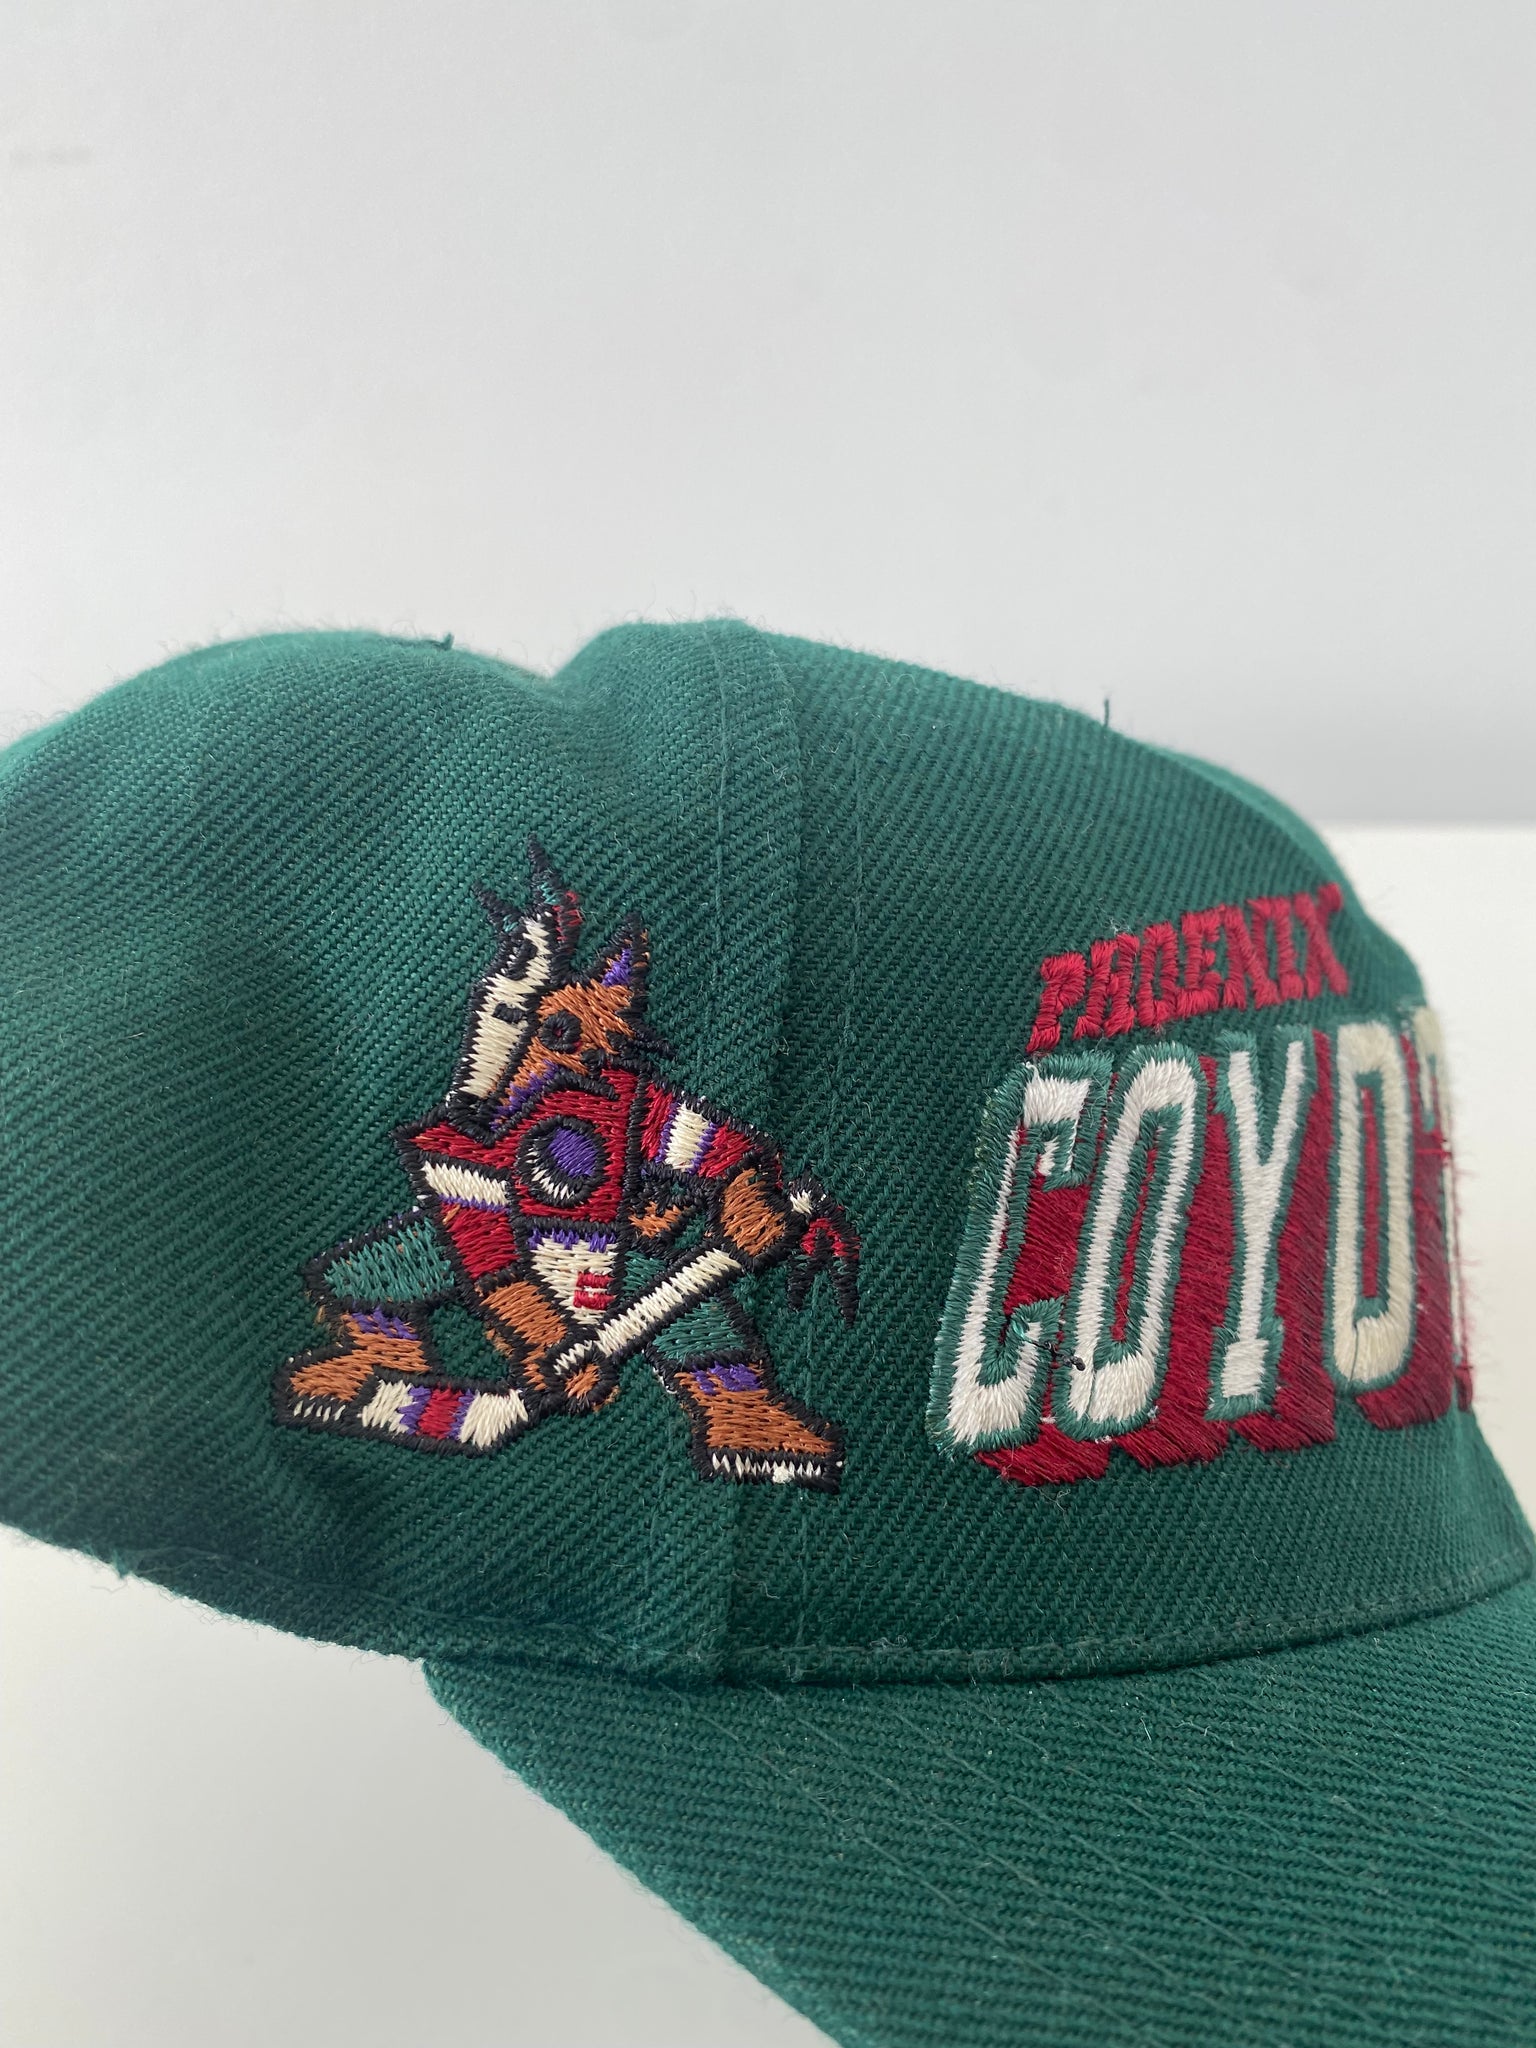 Vintage Phoenix Coyotes Snapback by SS